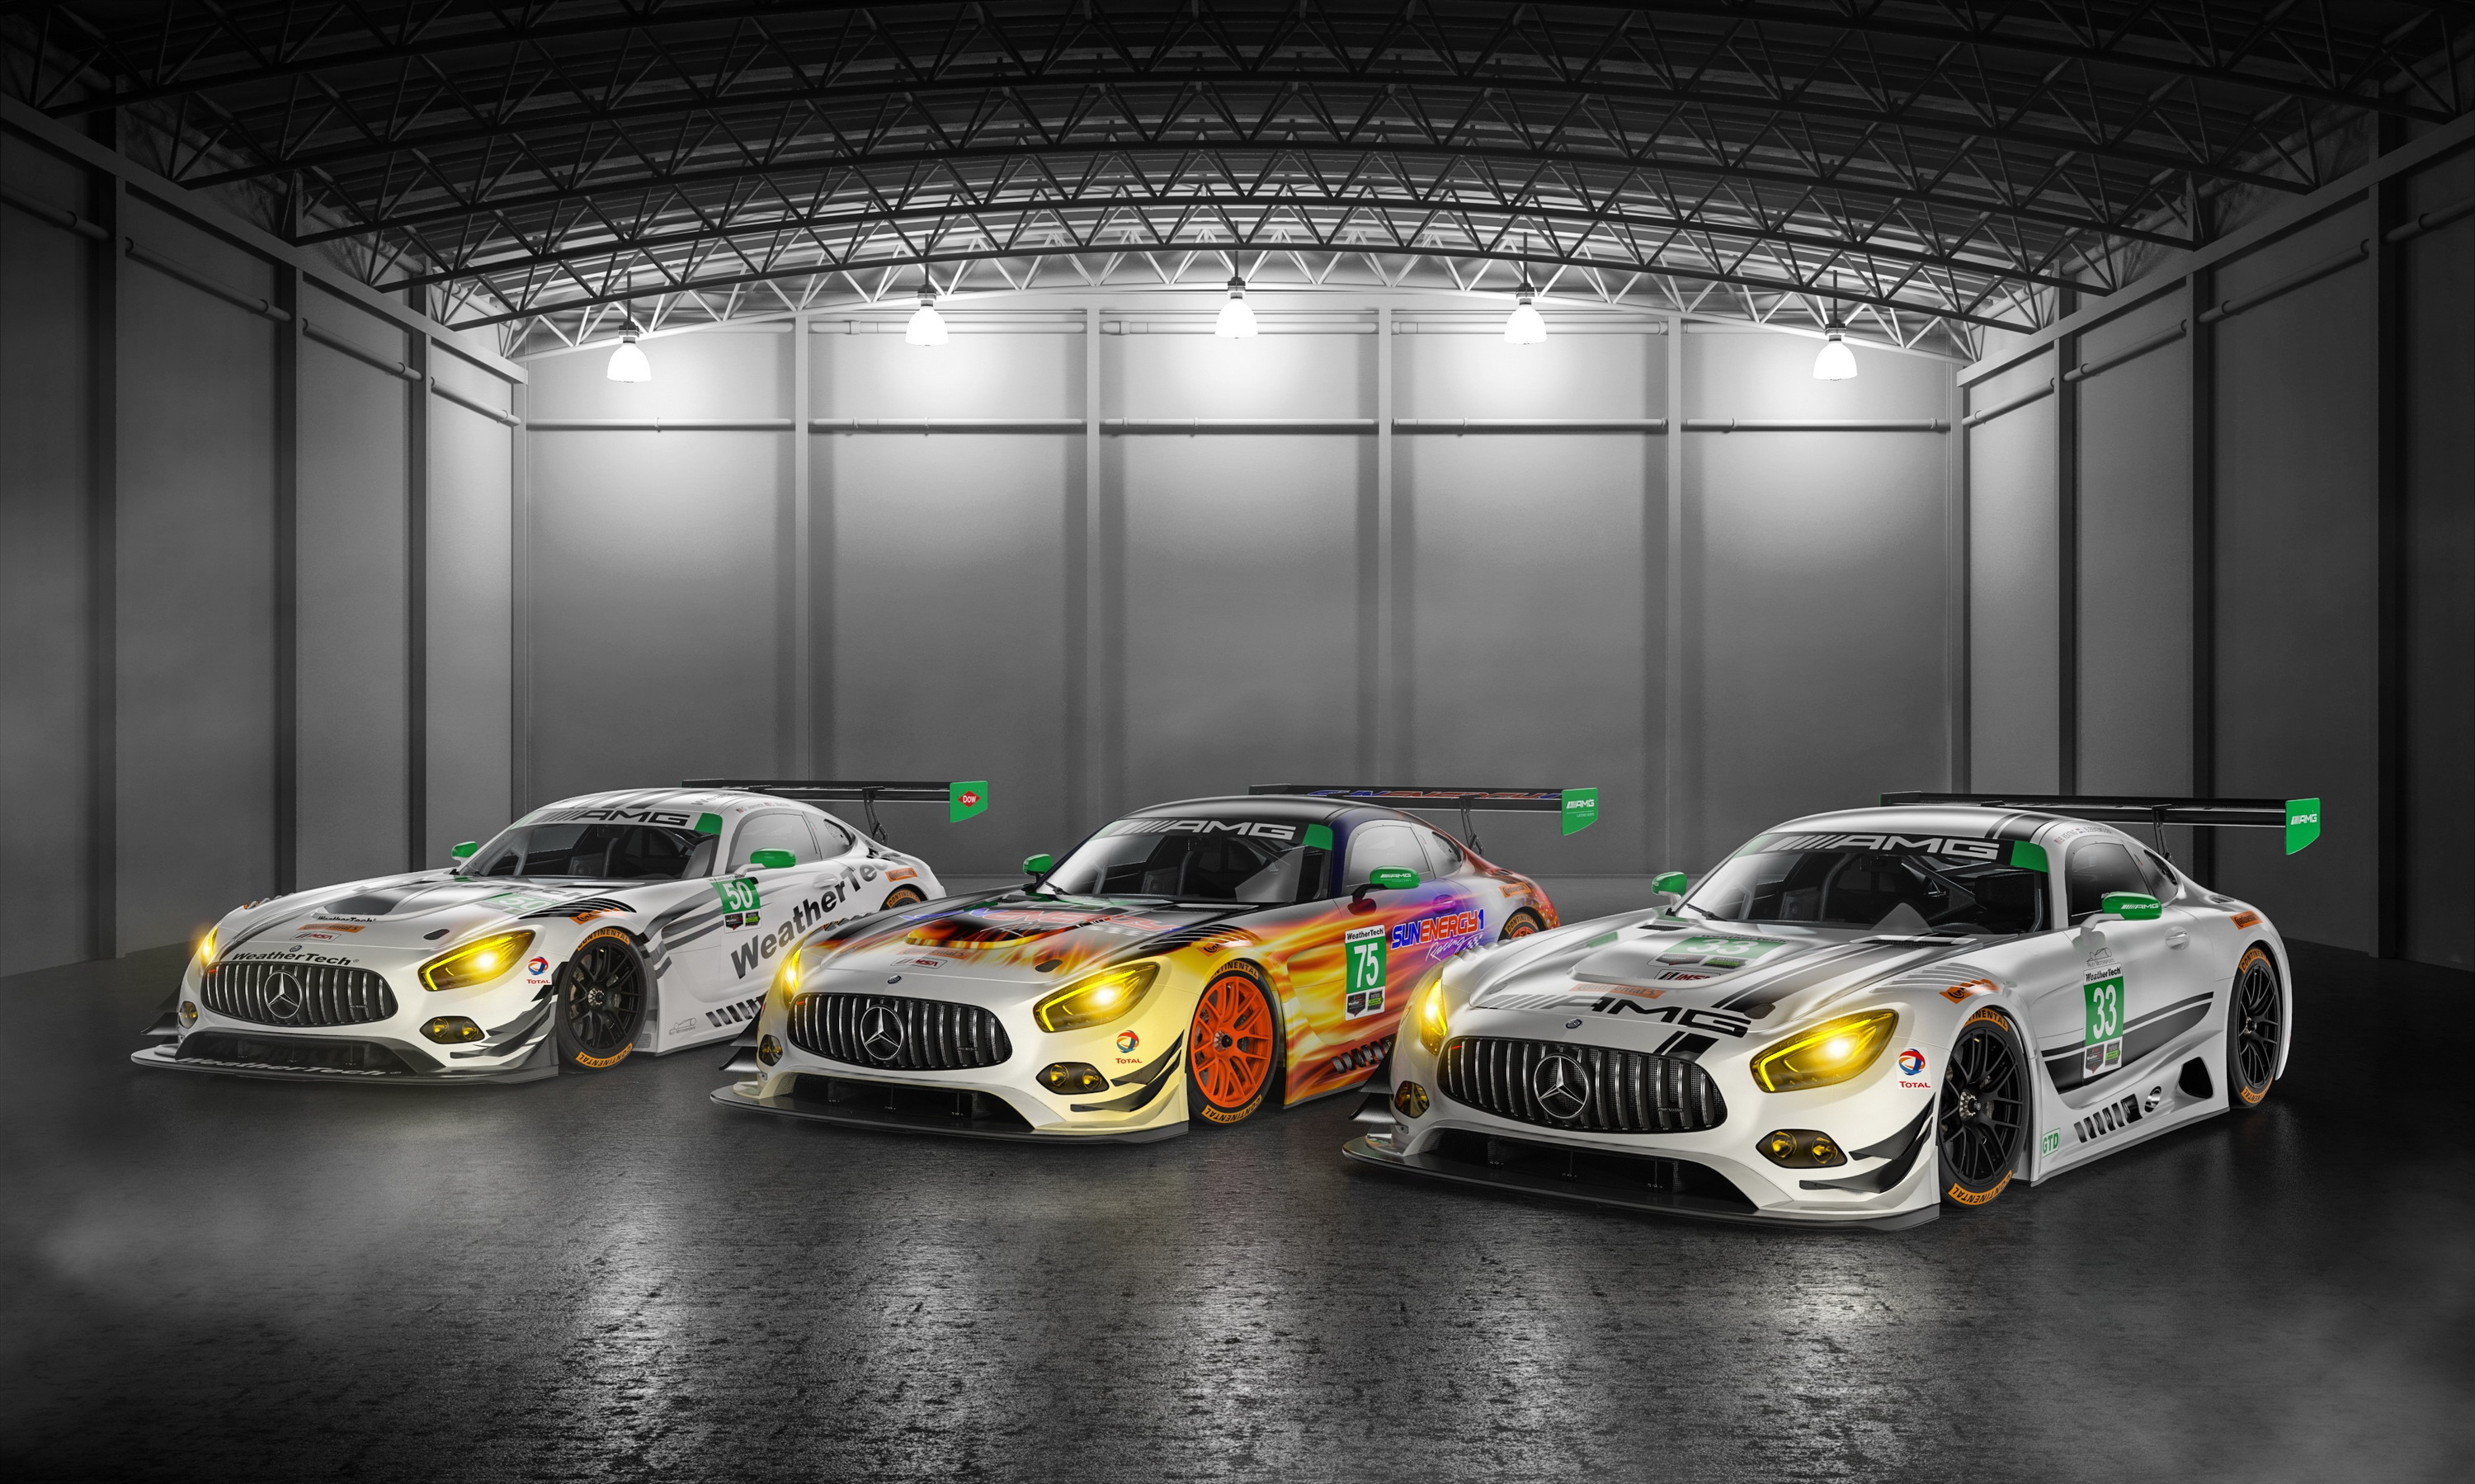 Mercedes AMG Joins IMSA With AMG GT3 Race Car Picture, Photo